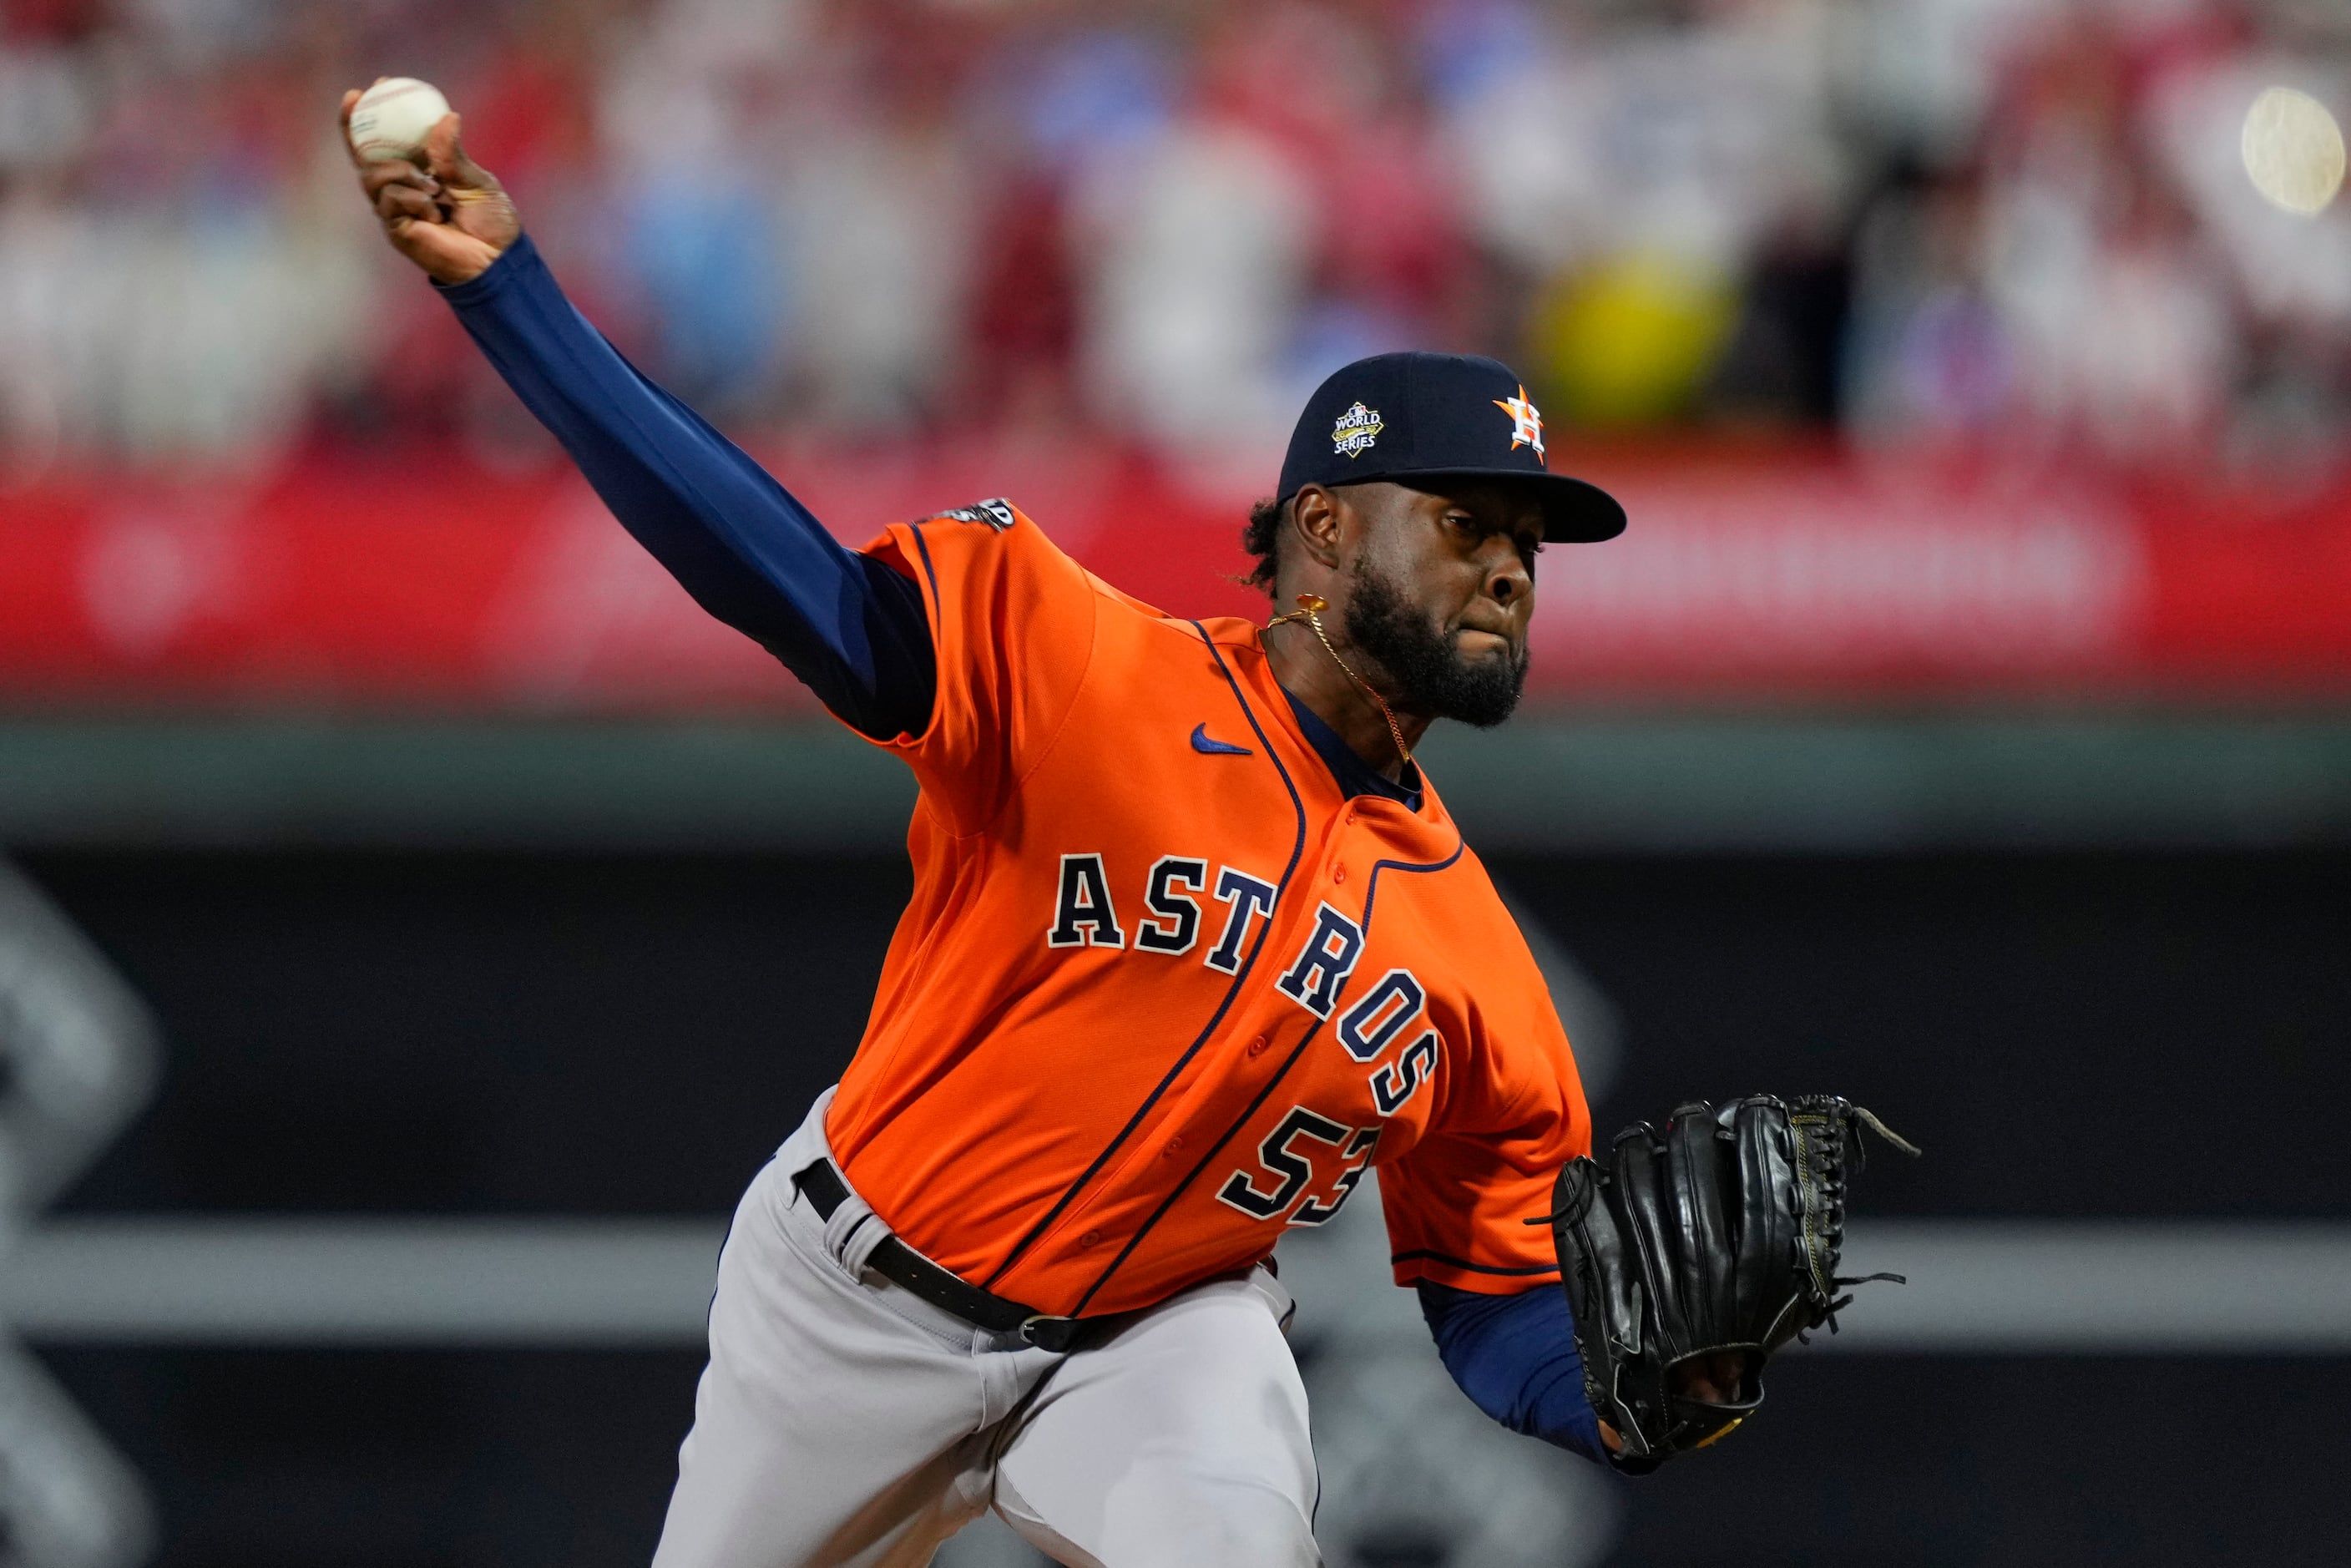 Cristian Javier, Astros' bullpen pitch second no-hitter in World Series